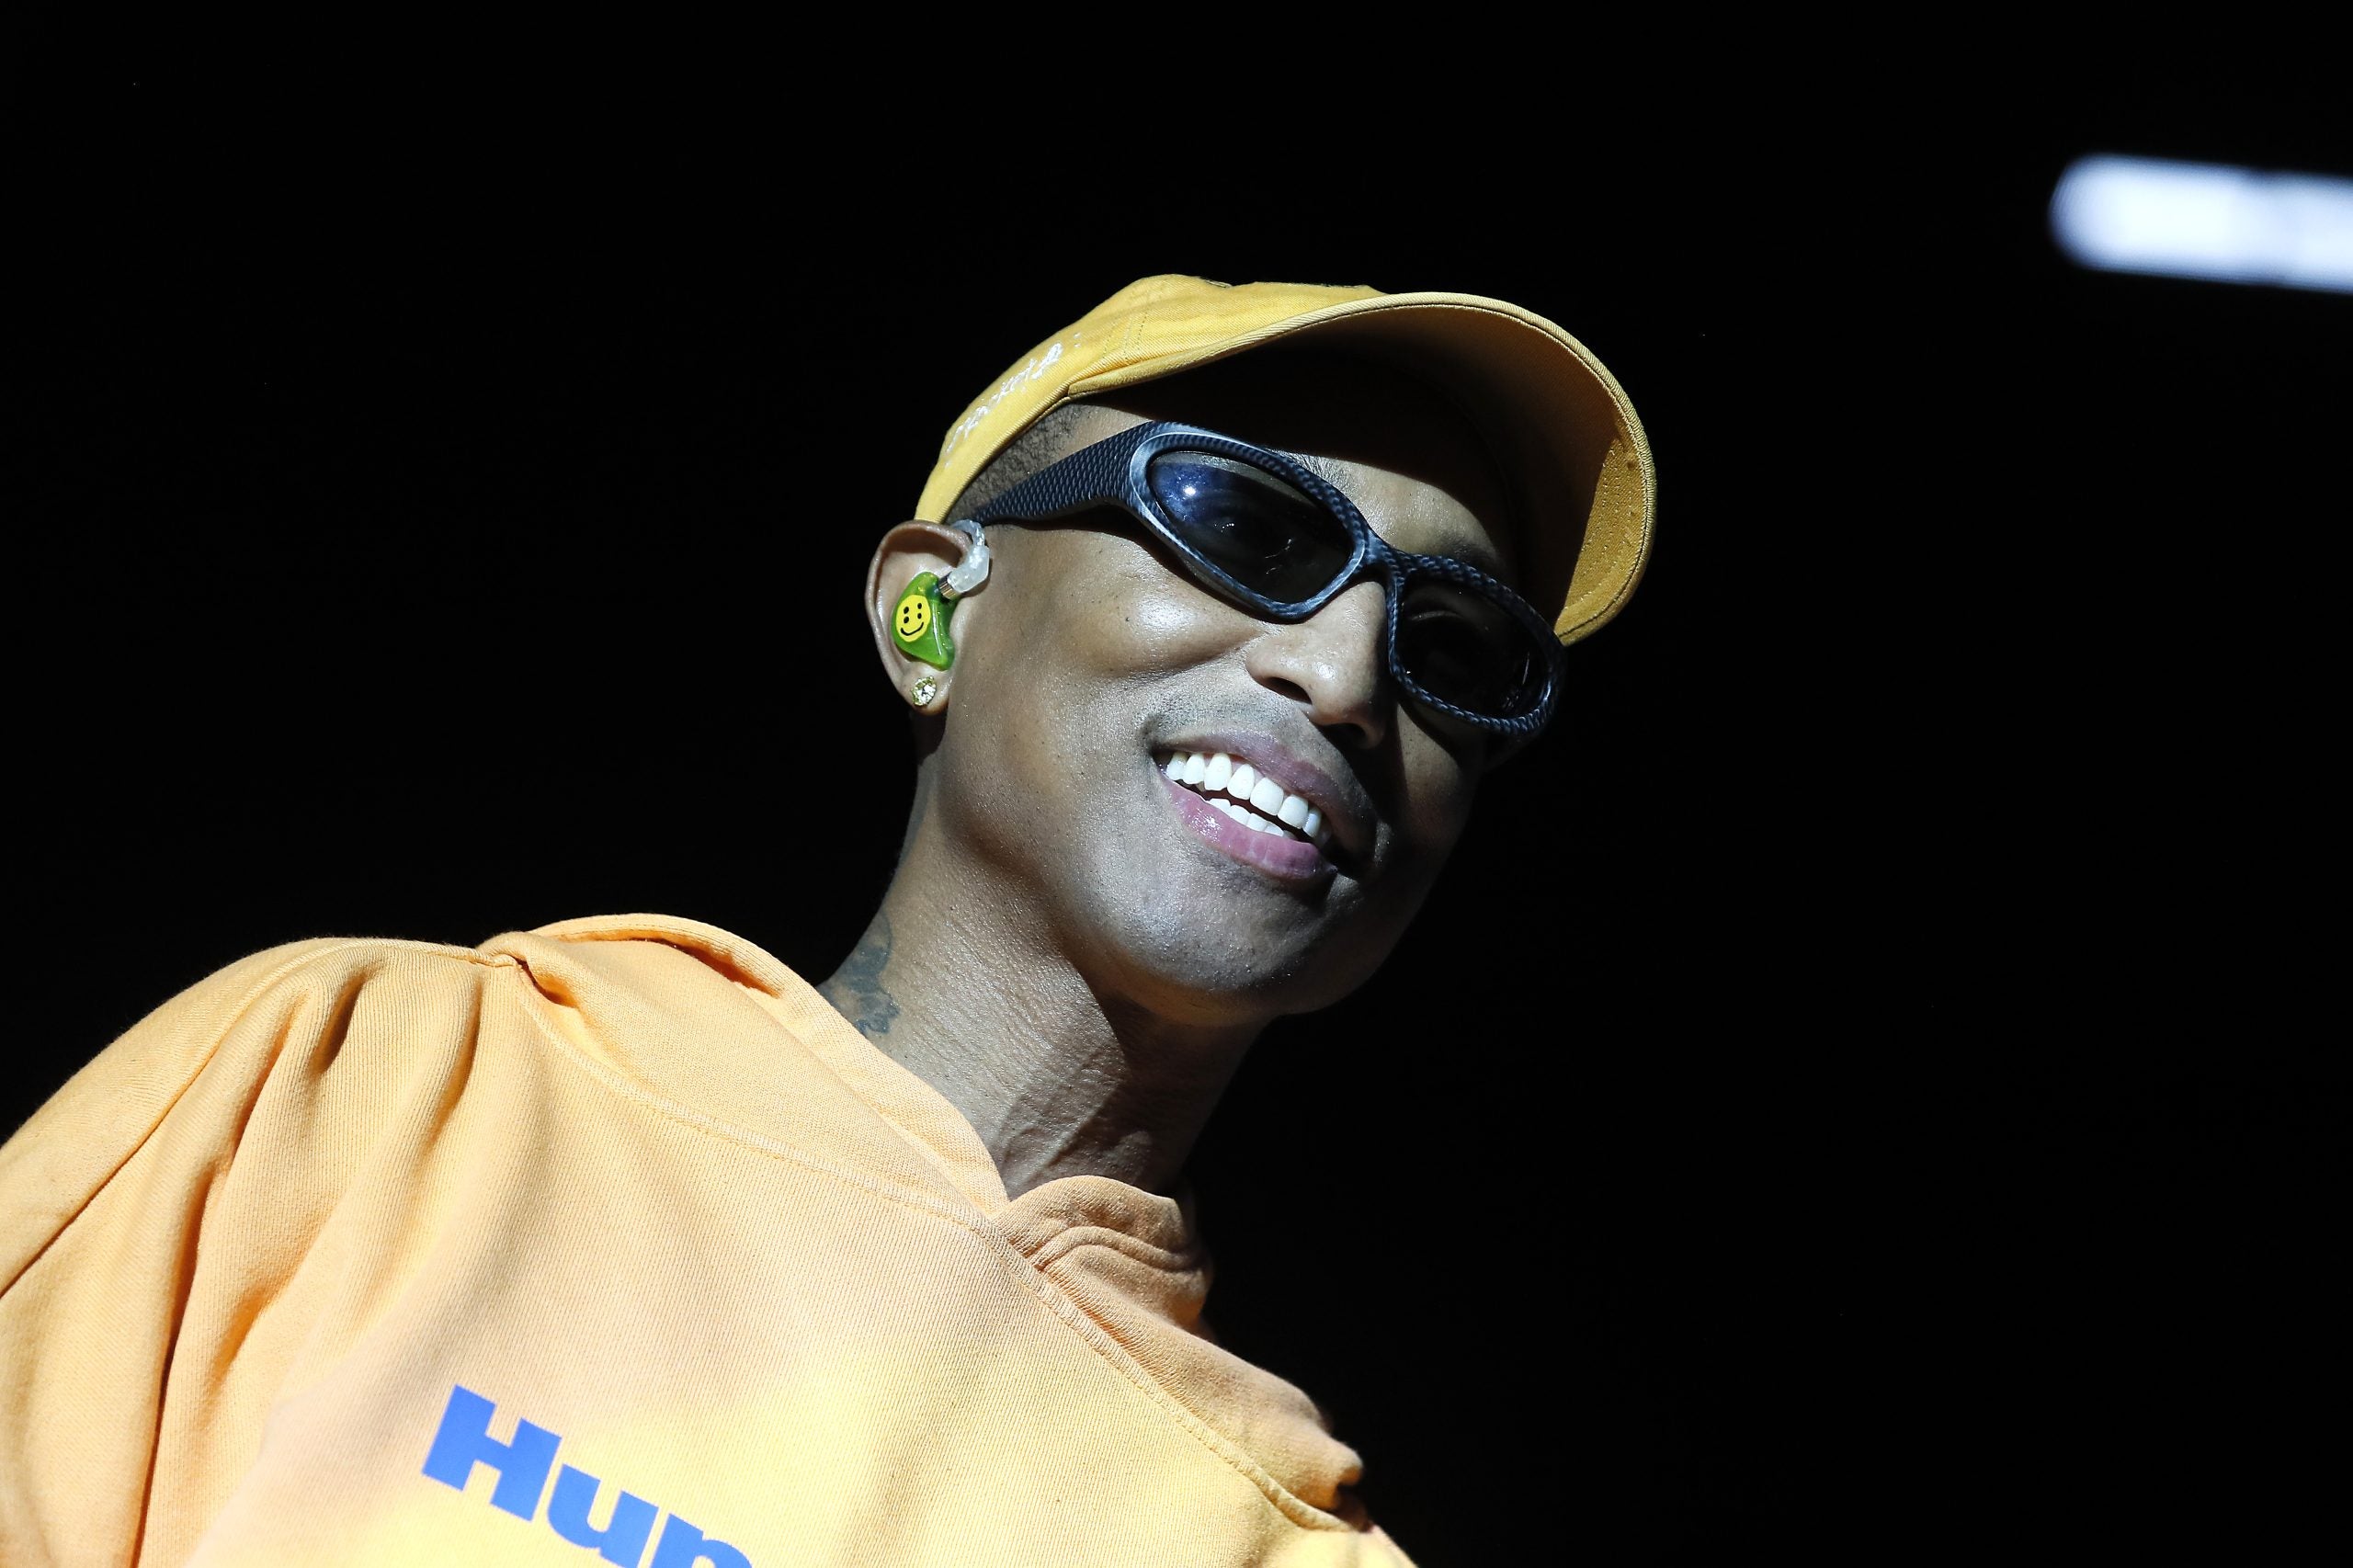 There's Not Enough': Pharrell Williams Calls Out the Lack of Black